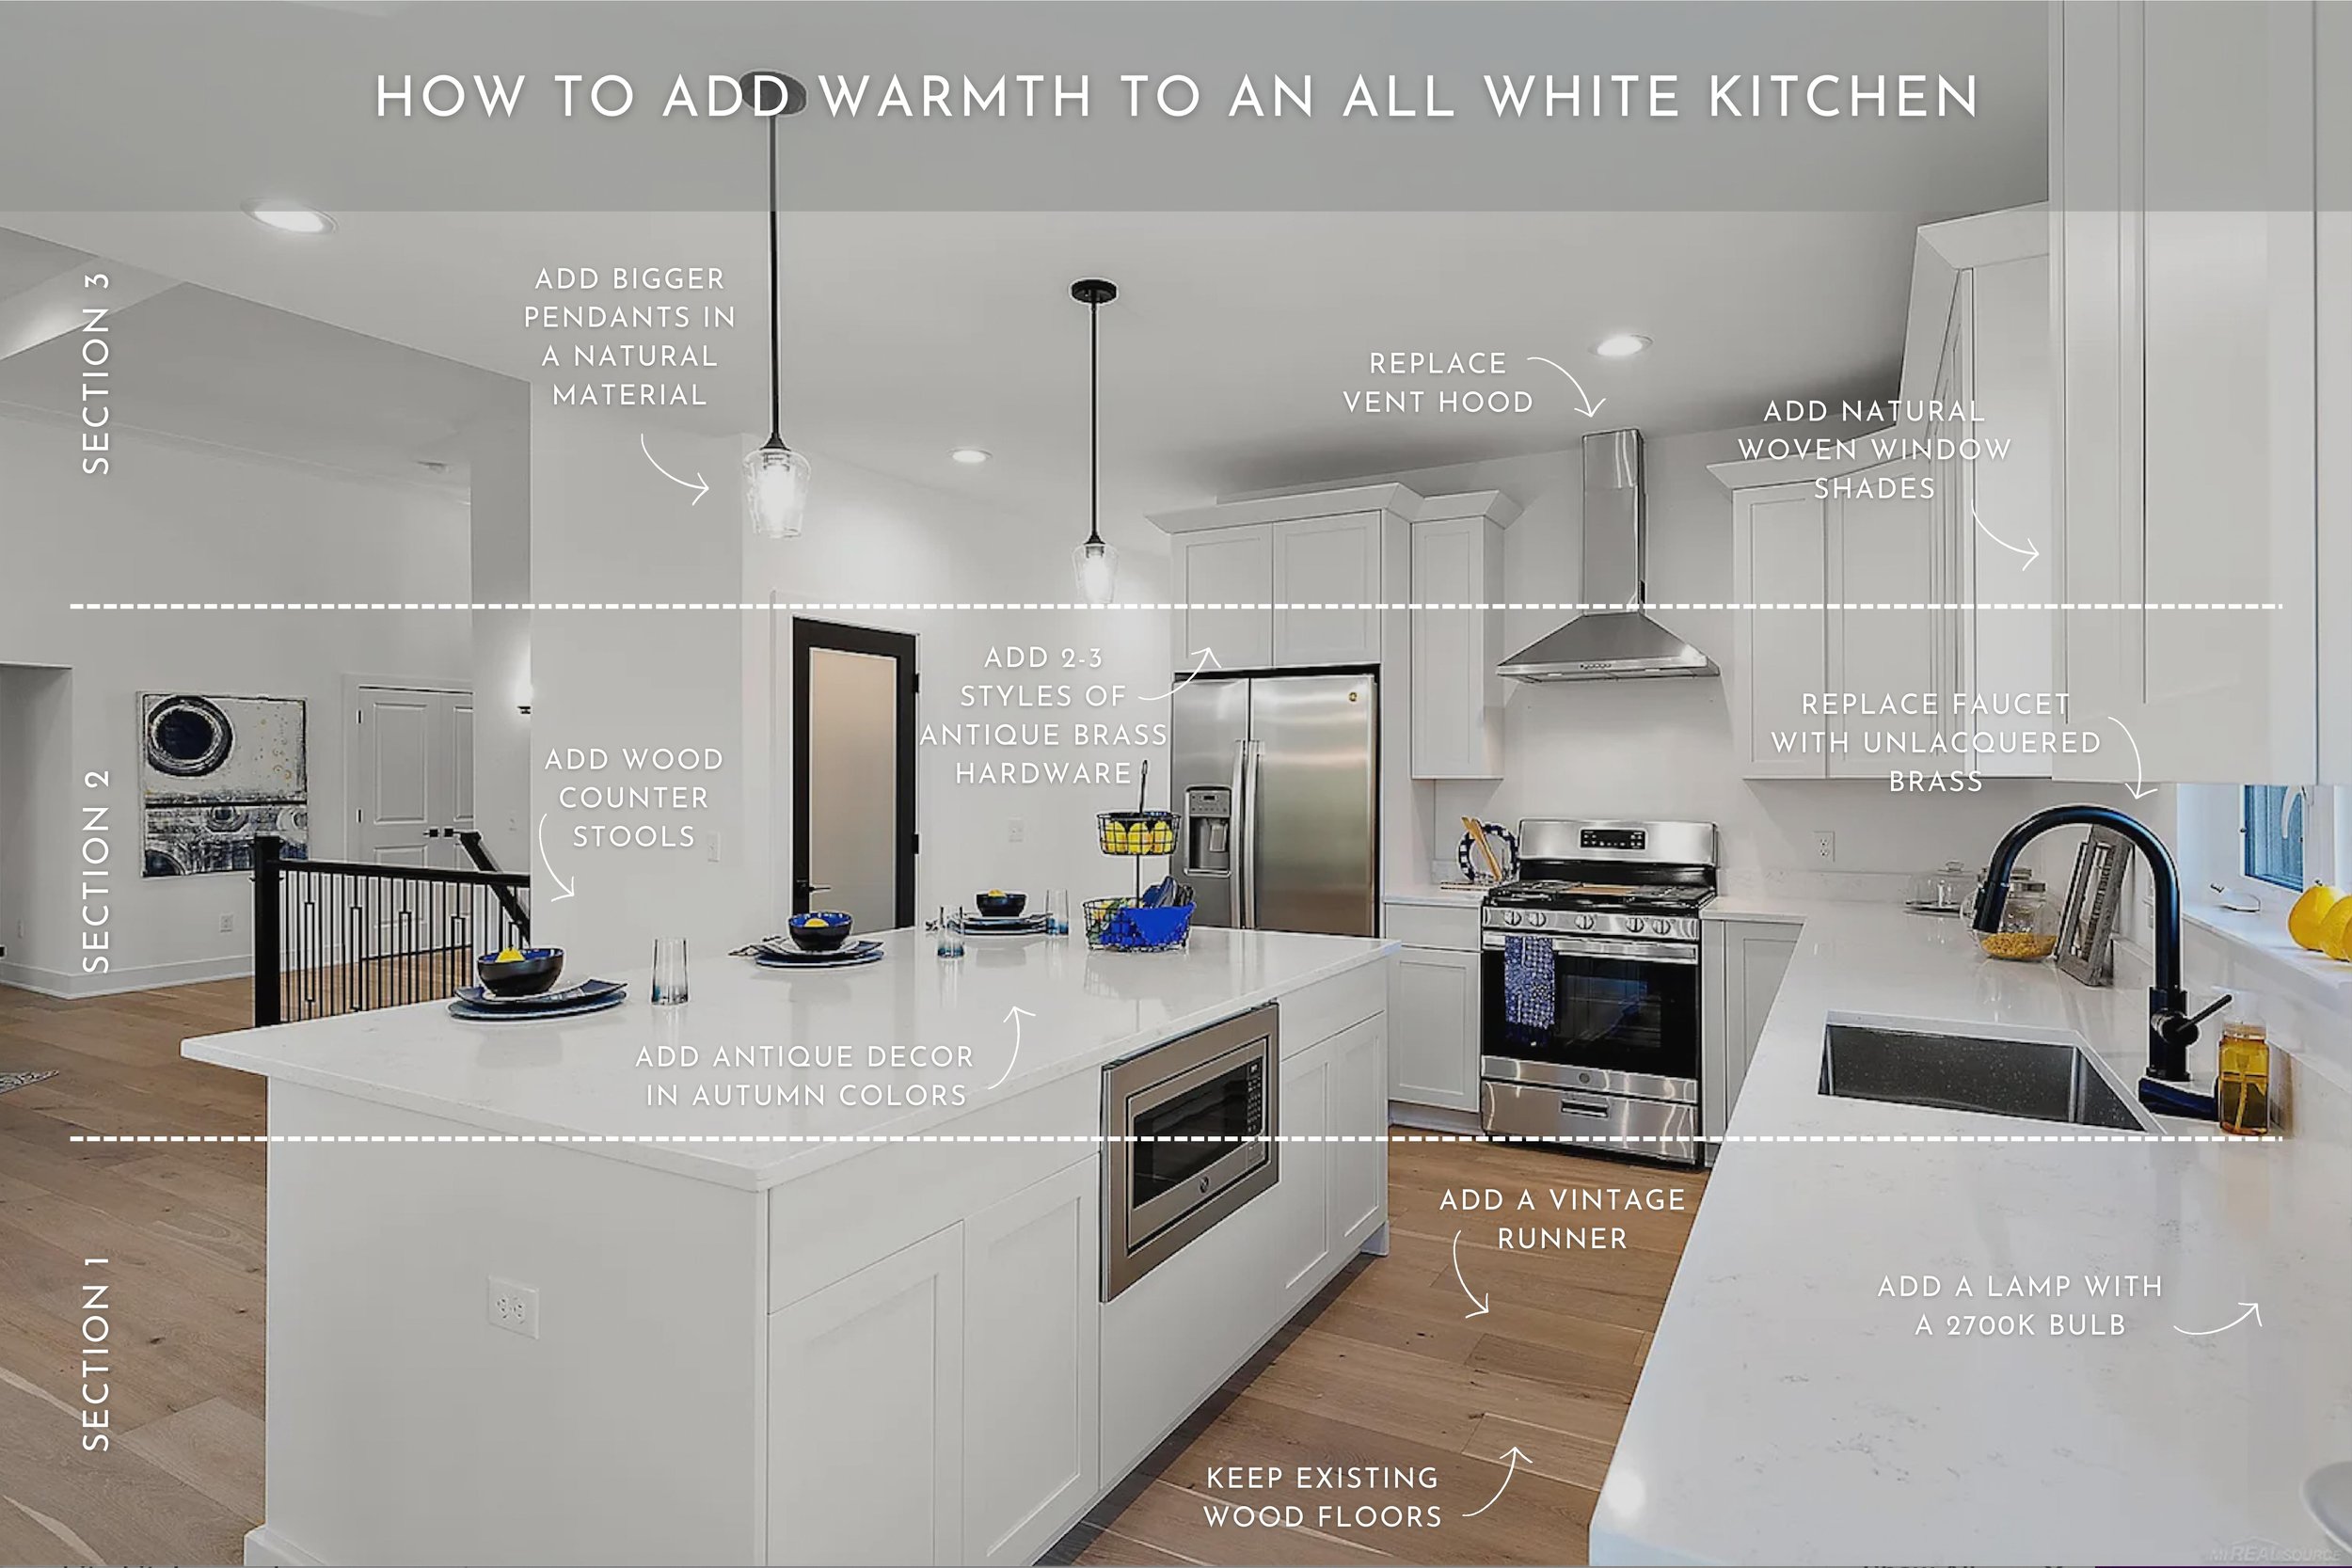 How to add warmth and personality to an all white kitchen. All white kitchen remodel tips. How to add character to a white kitchen. Nadine Stay